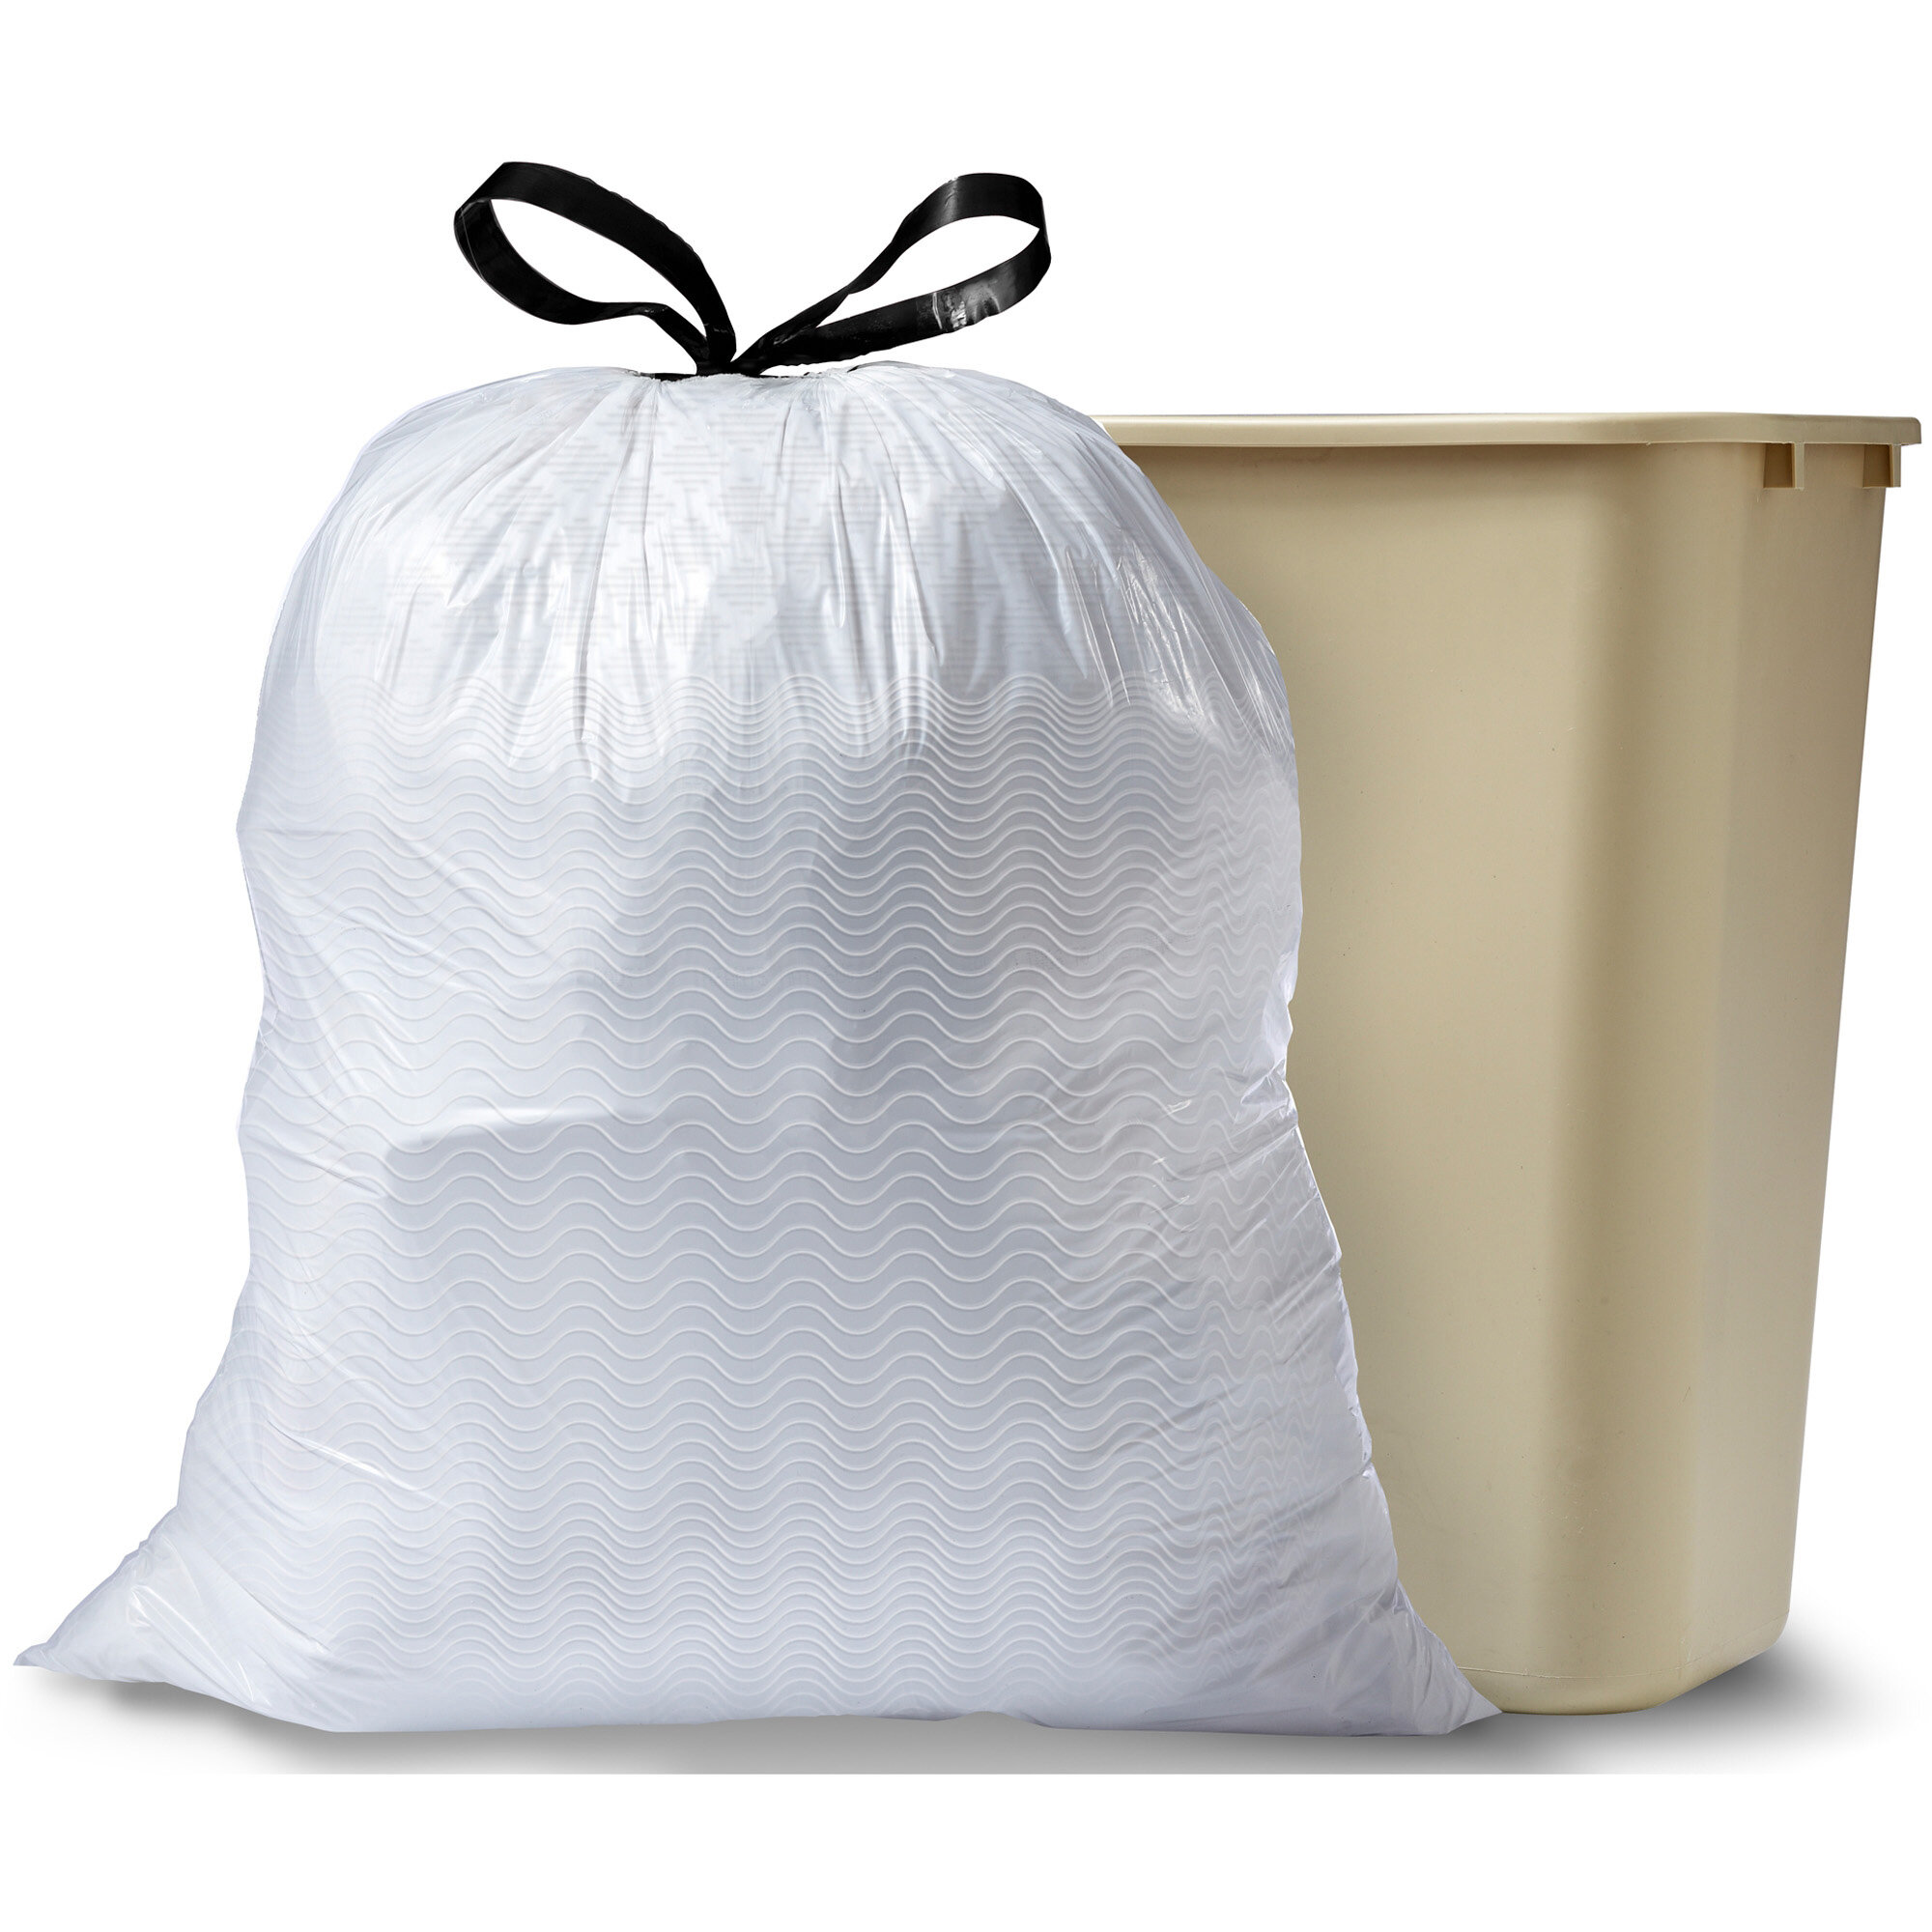 Max-Tough 8 Gallon Flap Tie Home/Office Waste Basket Star-Seal Trash Bags  (130 Count)